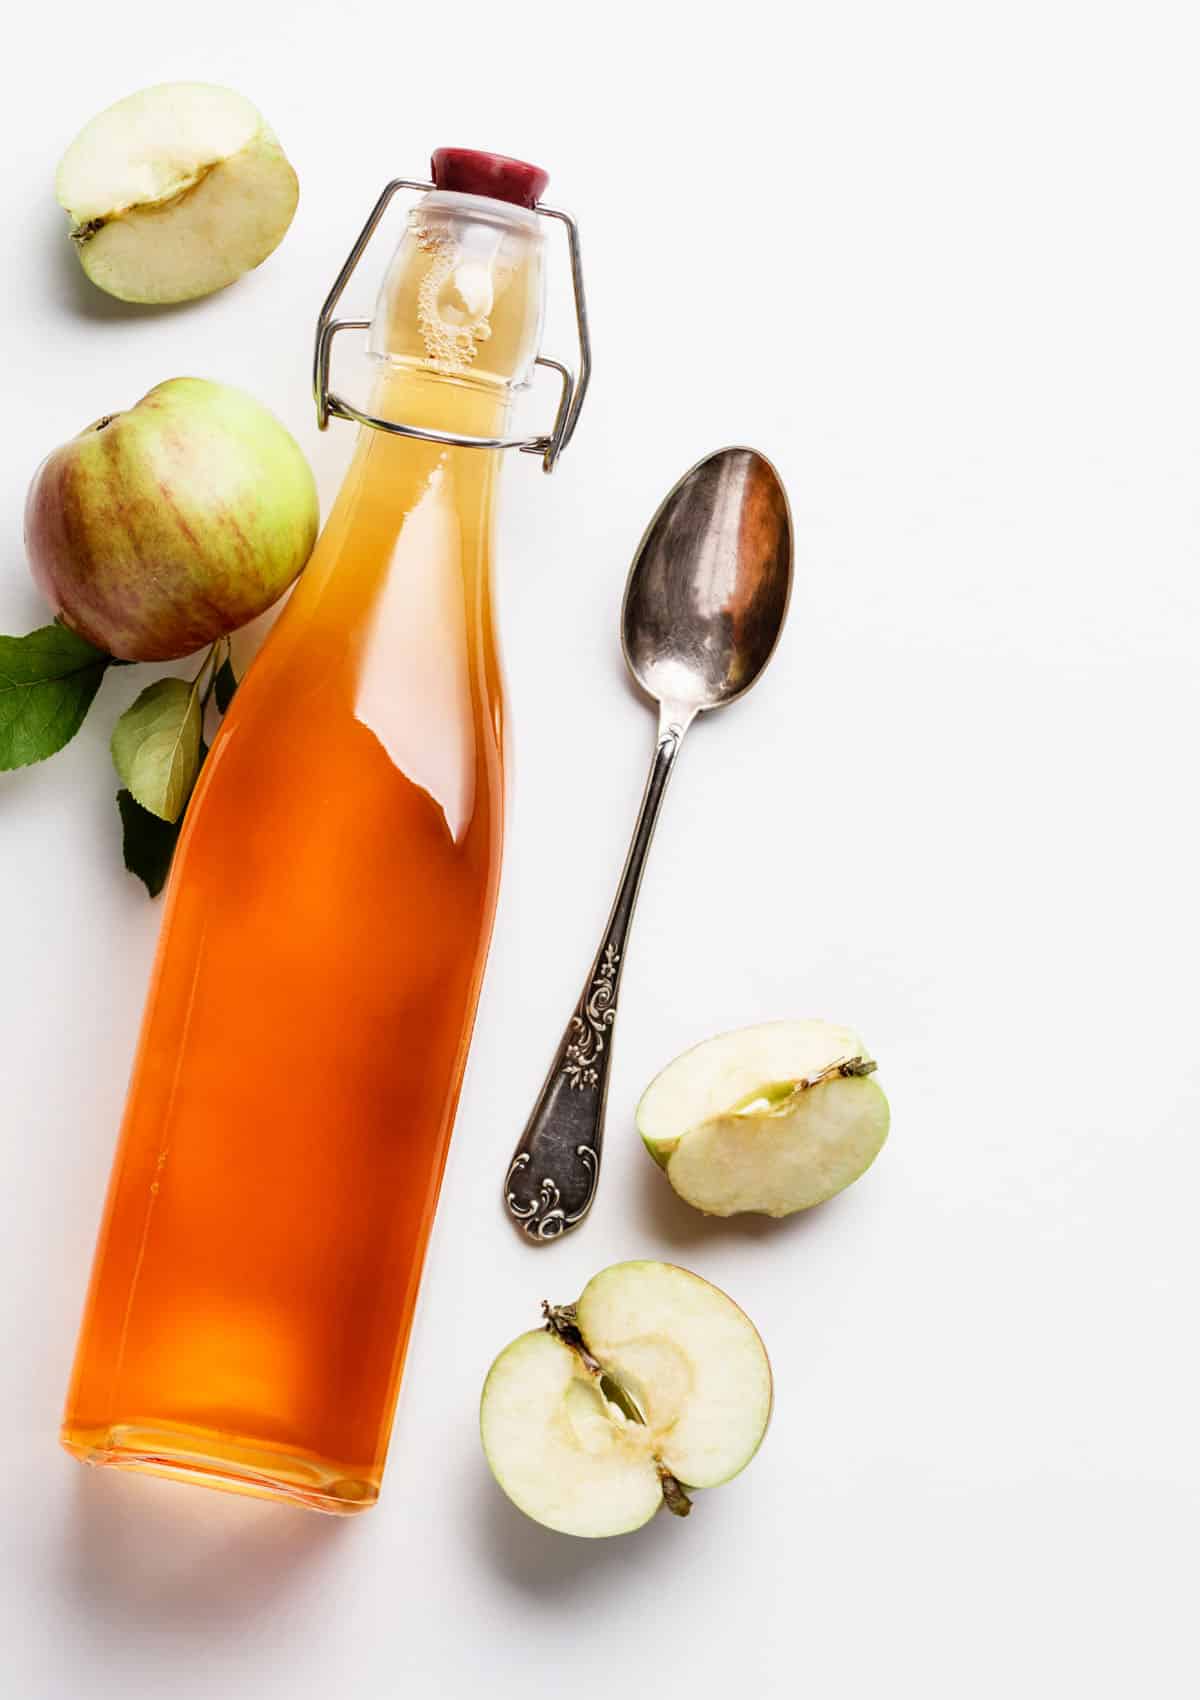 The difference between vinaigrette and vinegar is subtle but important. While both ingredients have a sharp, acidic taste, they are not interchangeable.